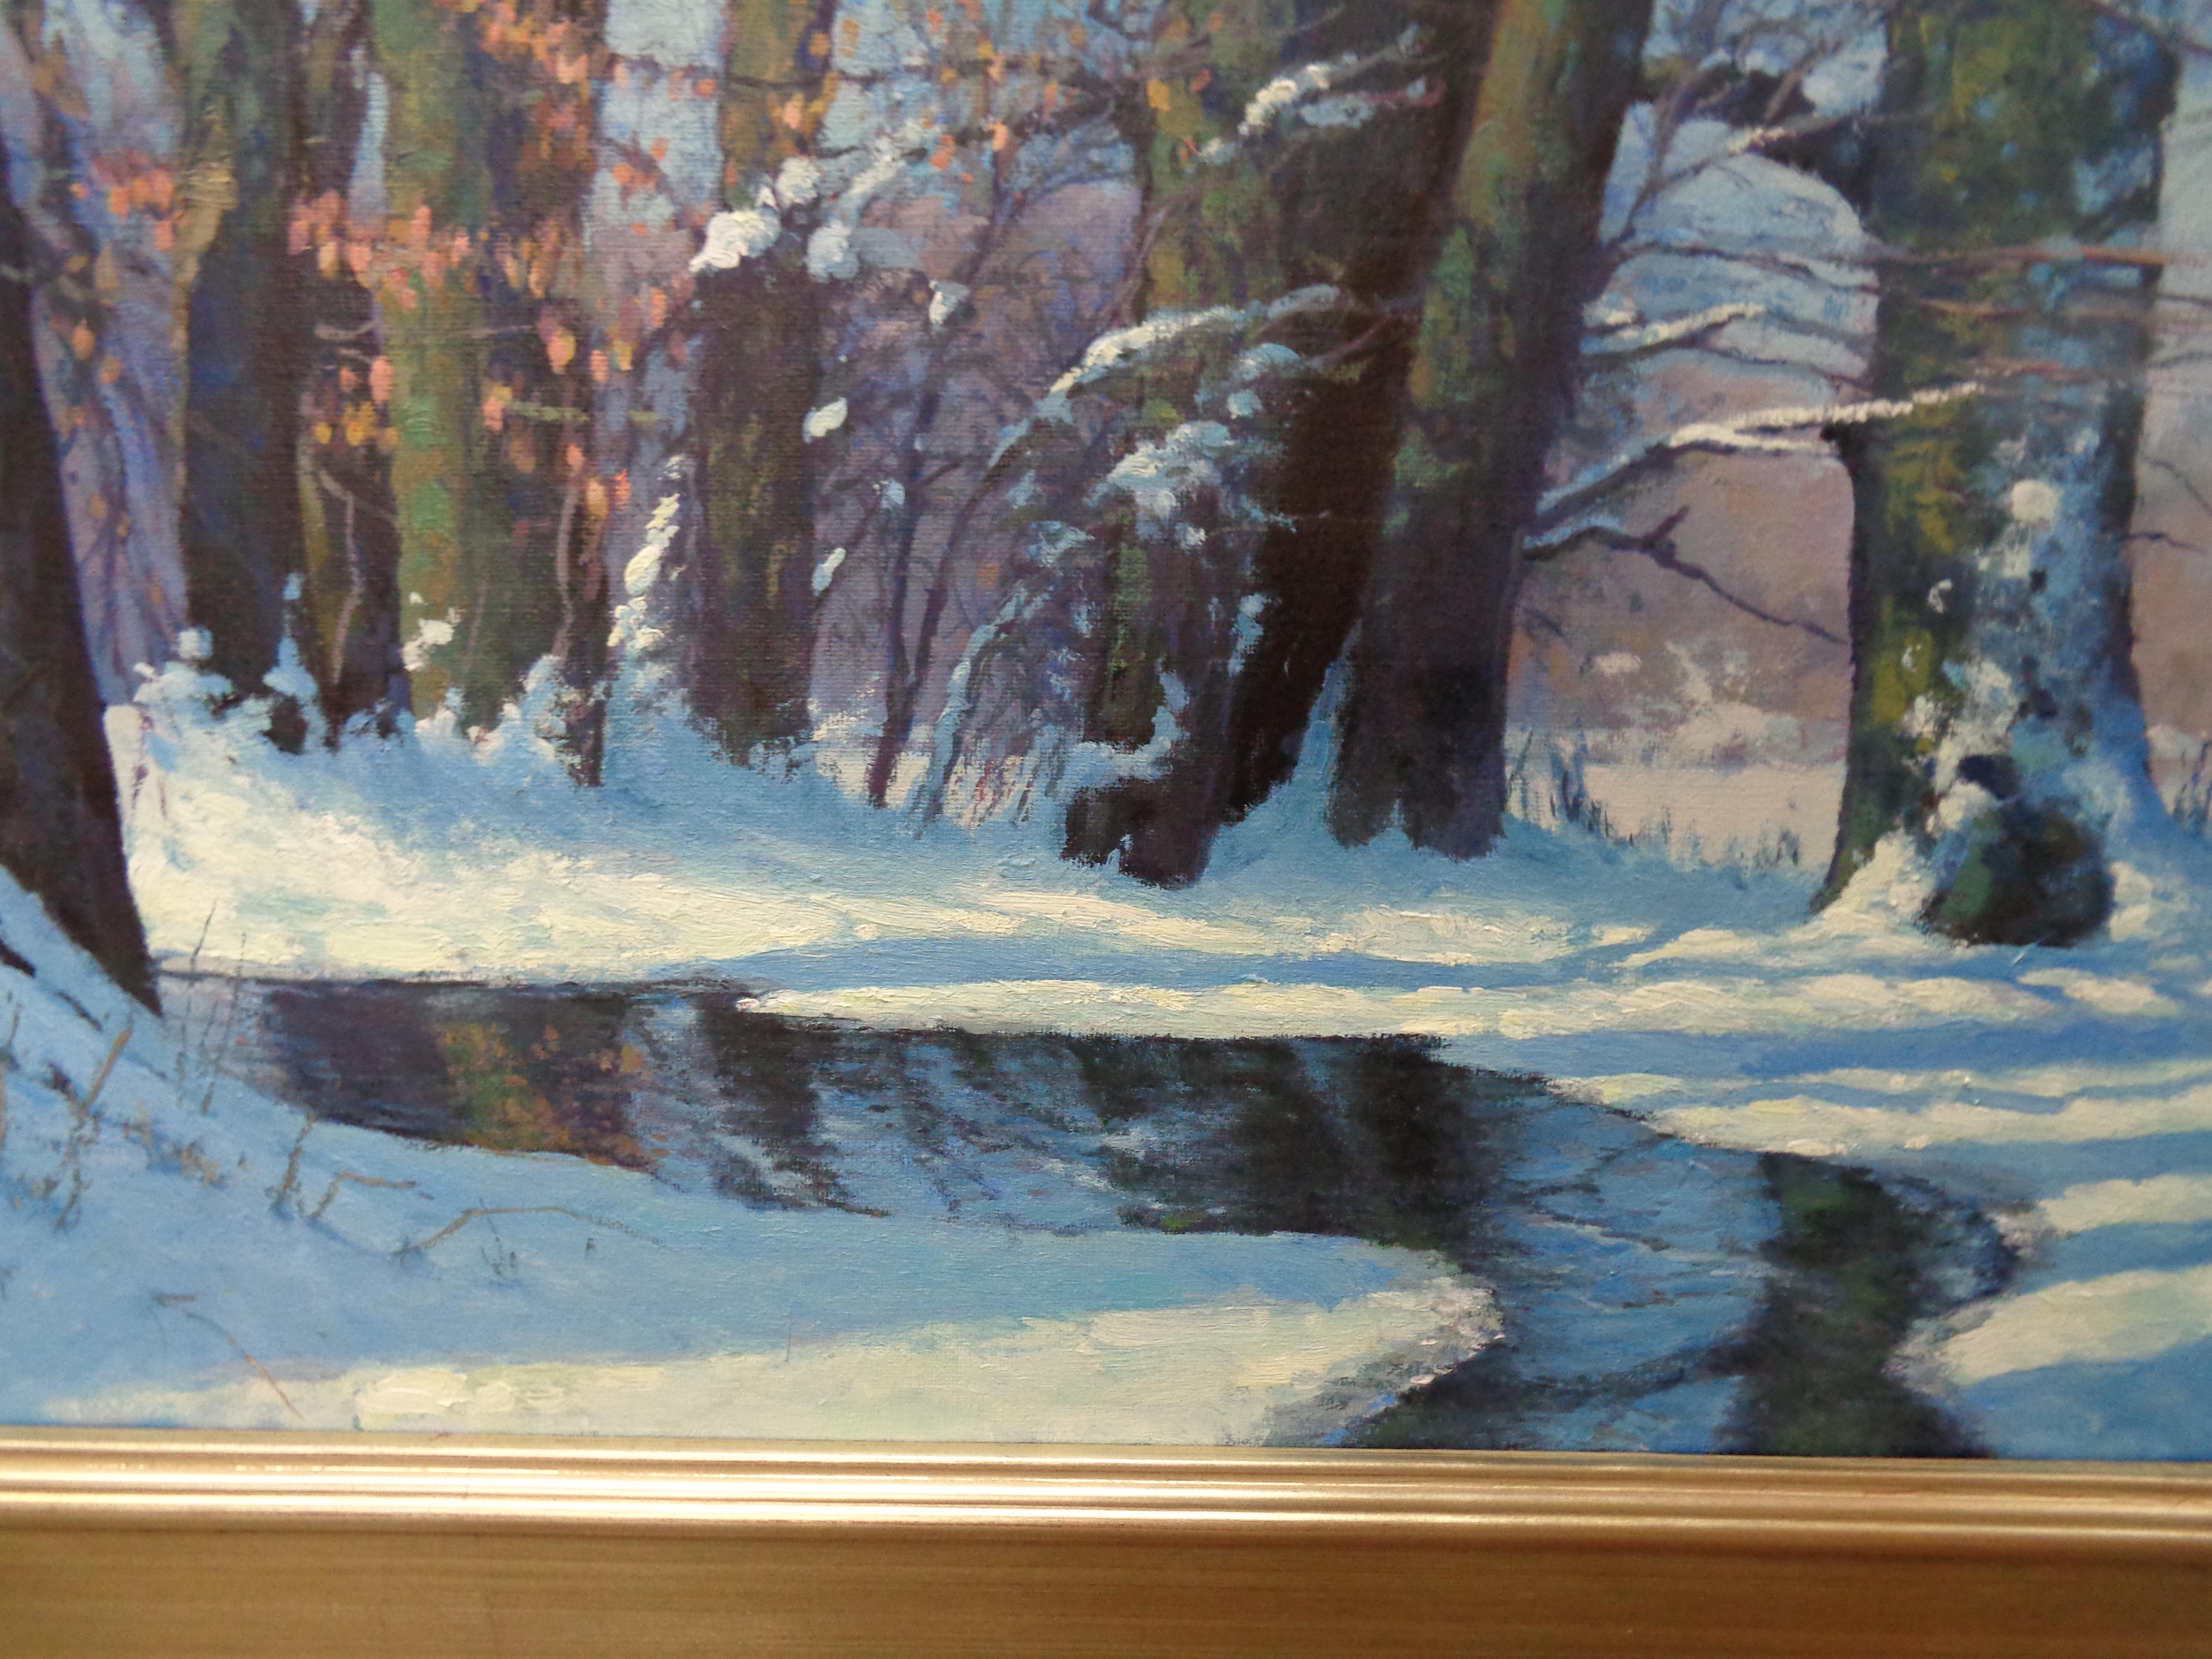  Winter Snow Scene Contemporary Landscape Oil Painting by Michael Budden For Sale 7